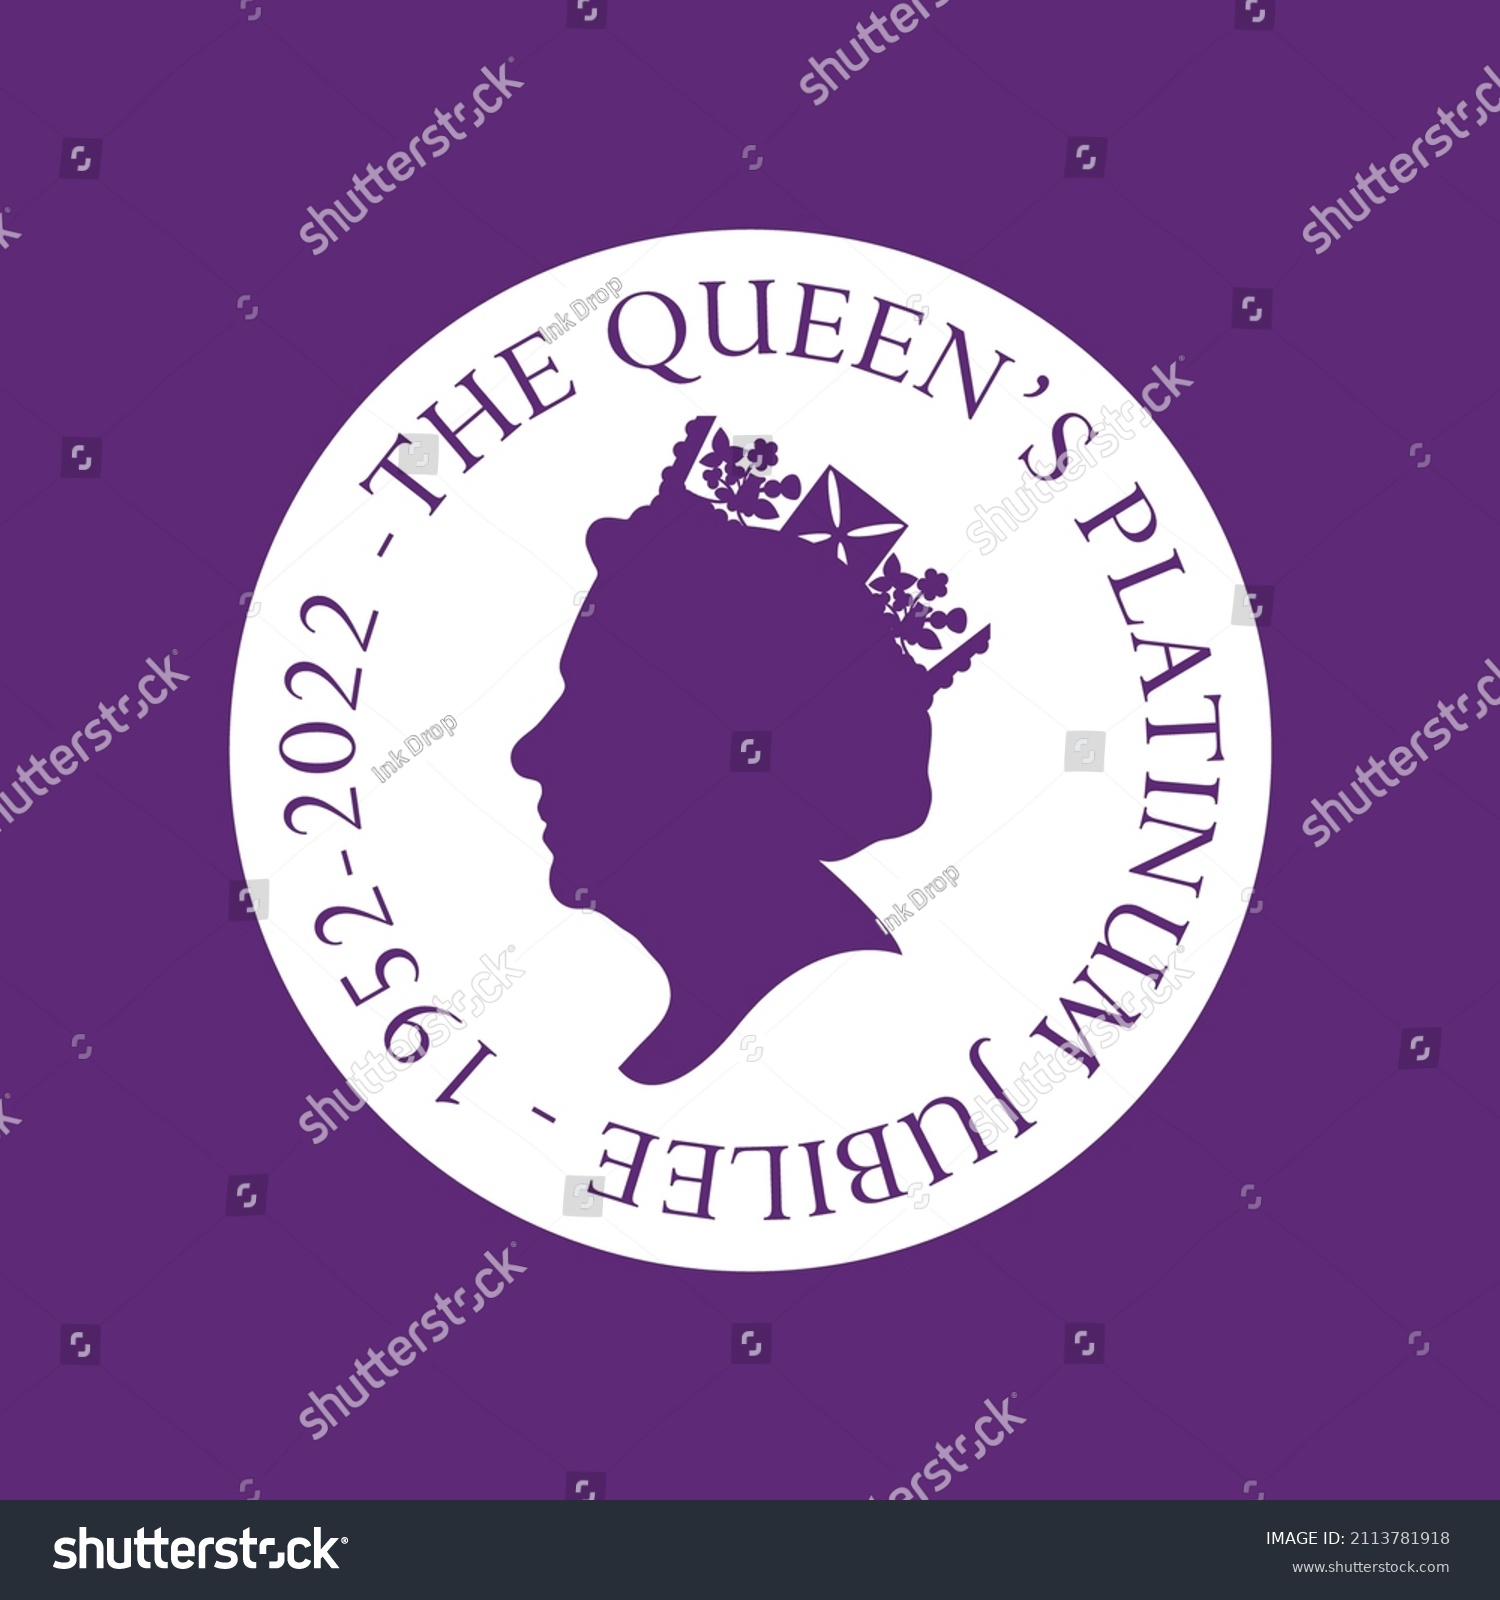 SVG of The Queen's Platinum Jubilee celebration background with side profile of Queen Elizabeth svg